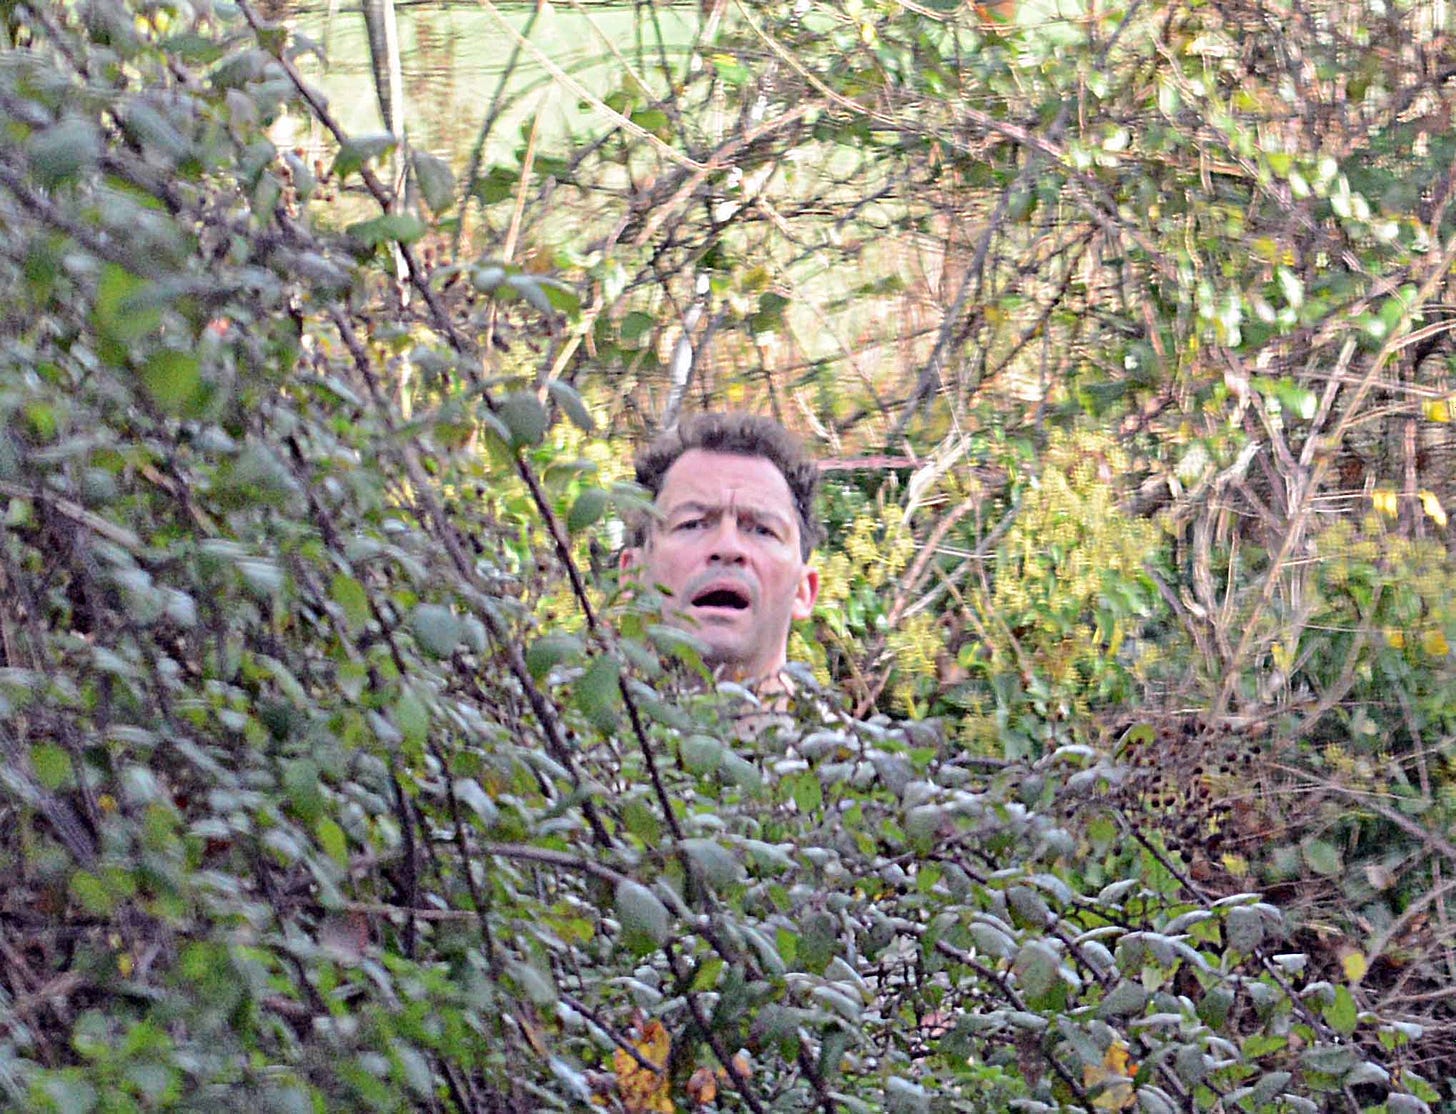 Dominic West tried to keep a low-profile as he hid in a bush